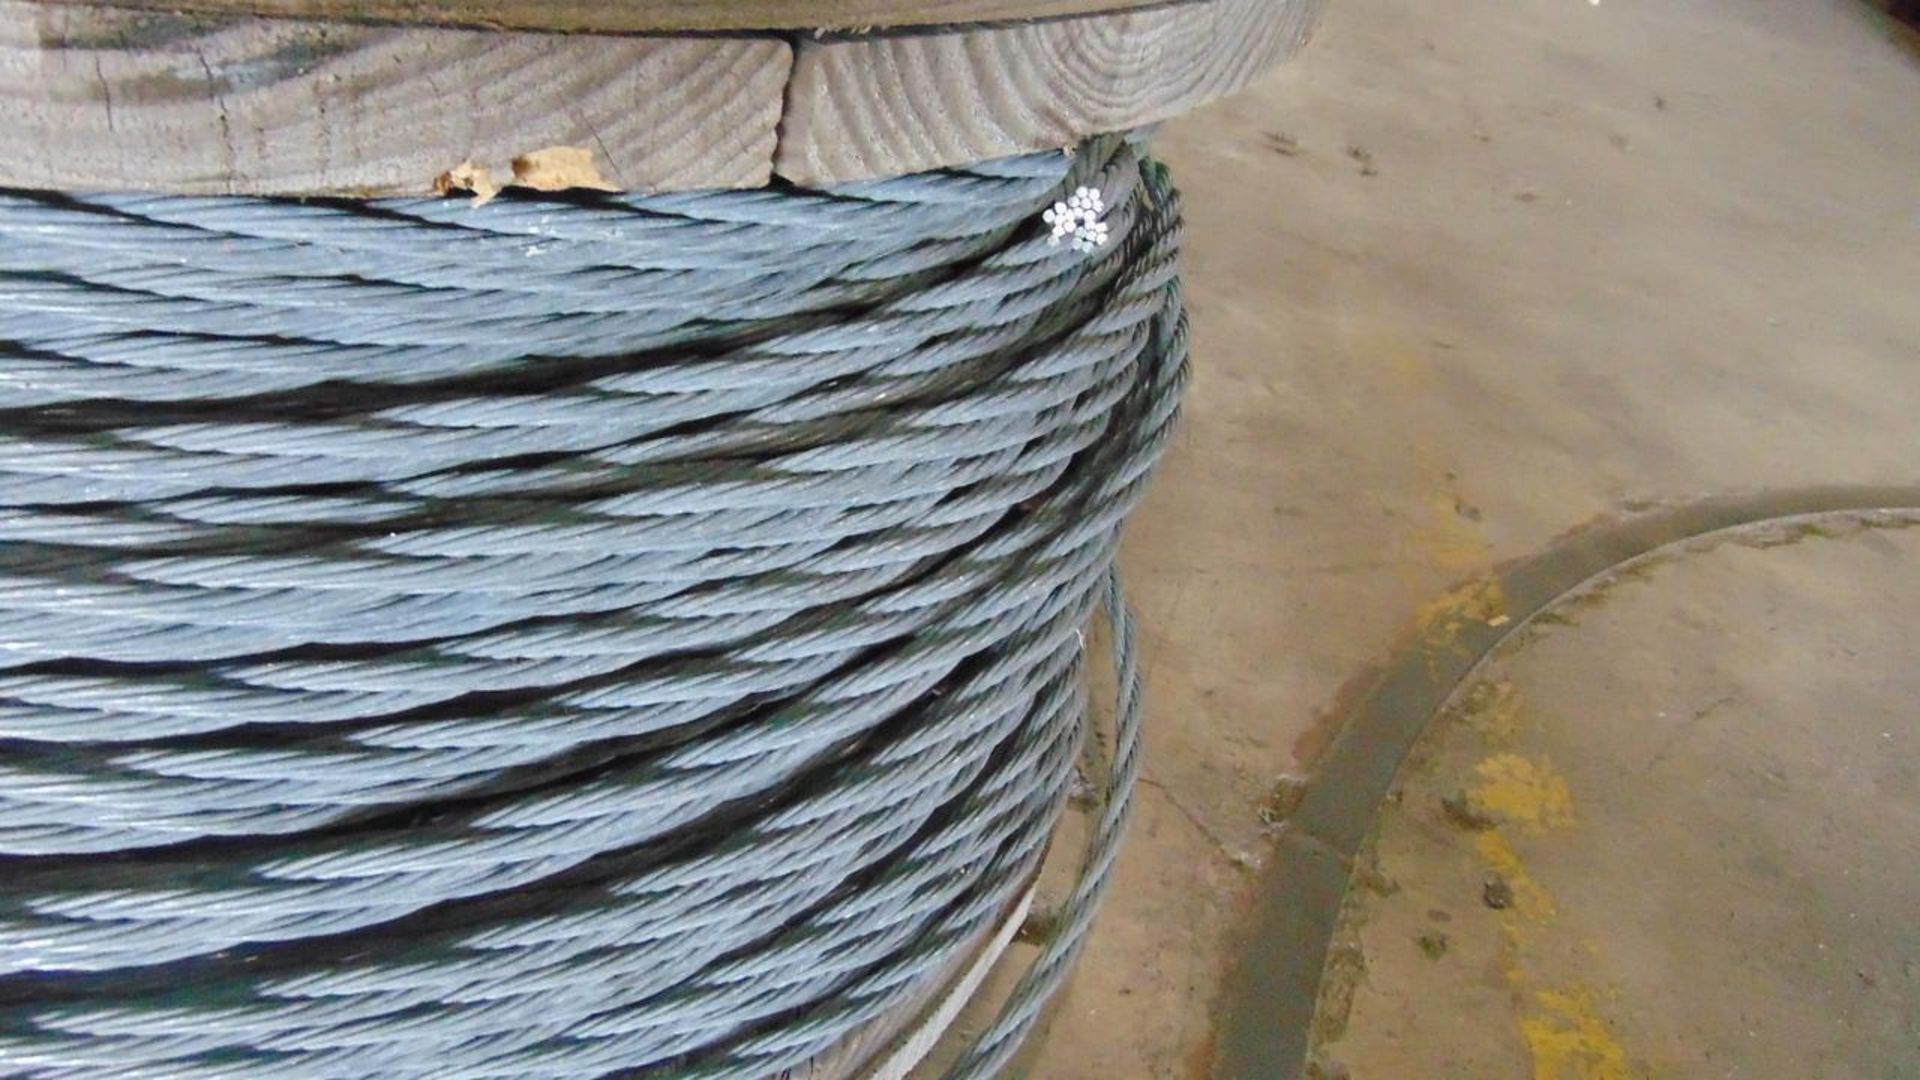 Steel Median Cable - Image 2 of 3